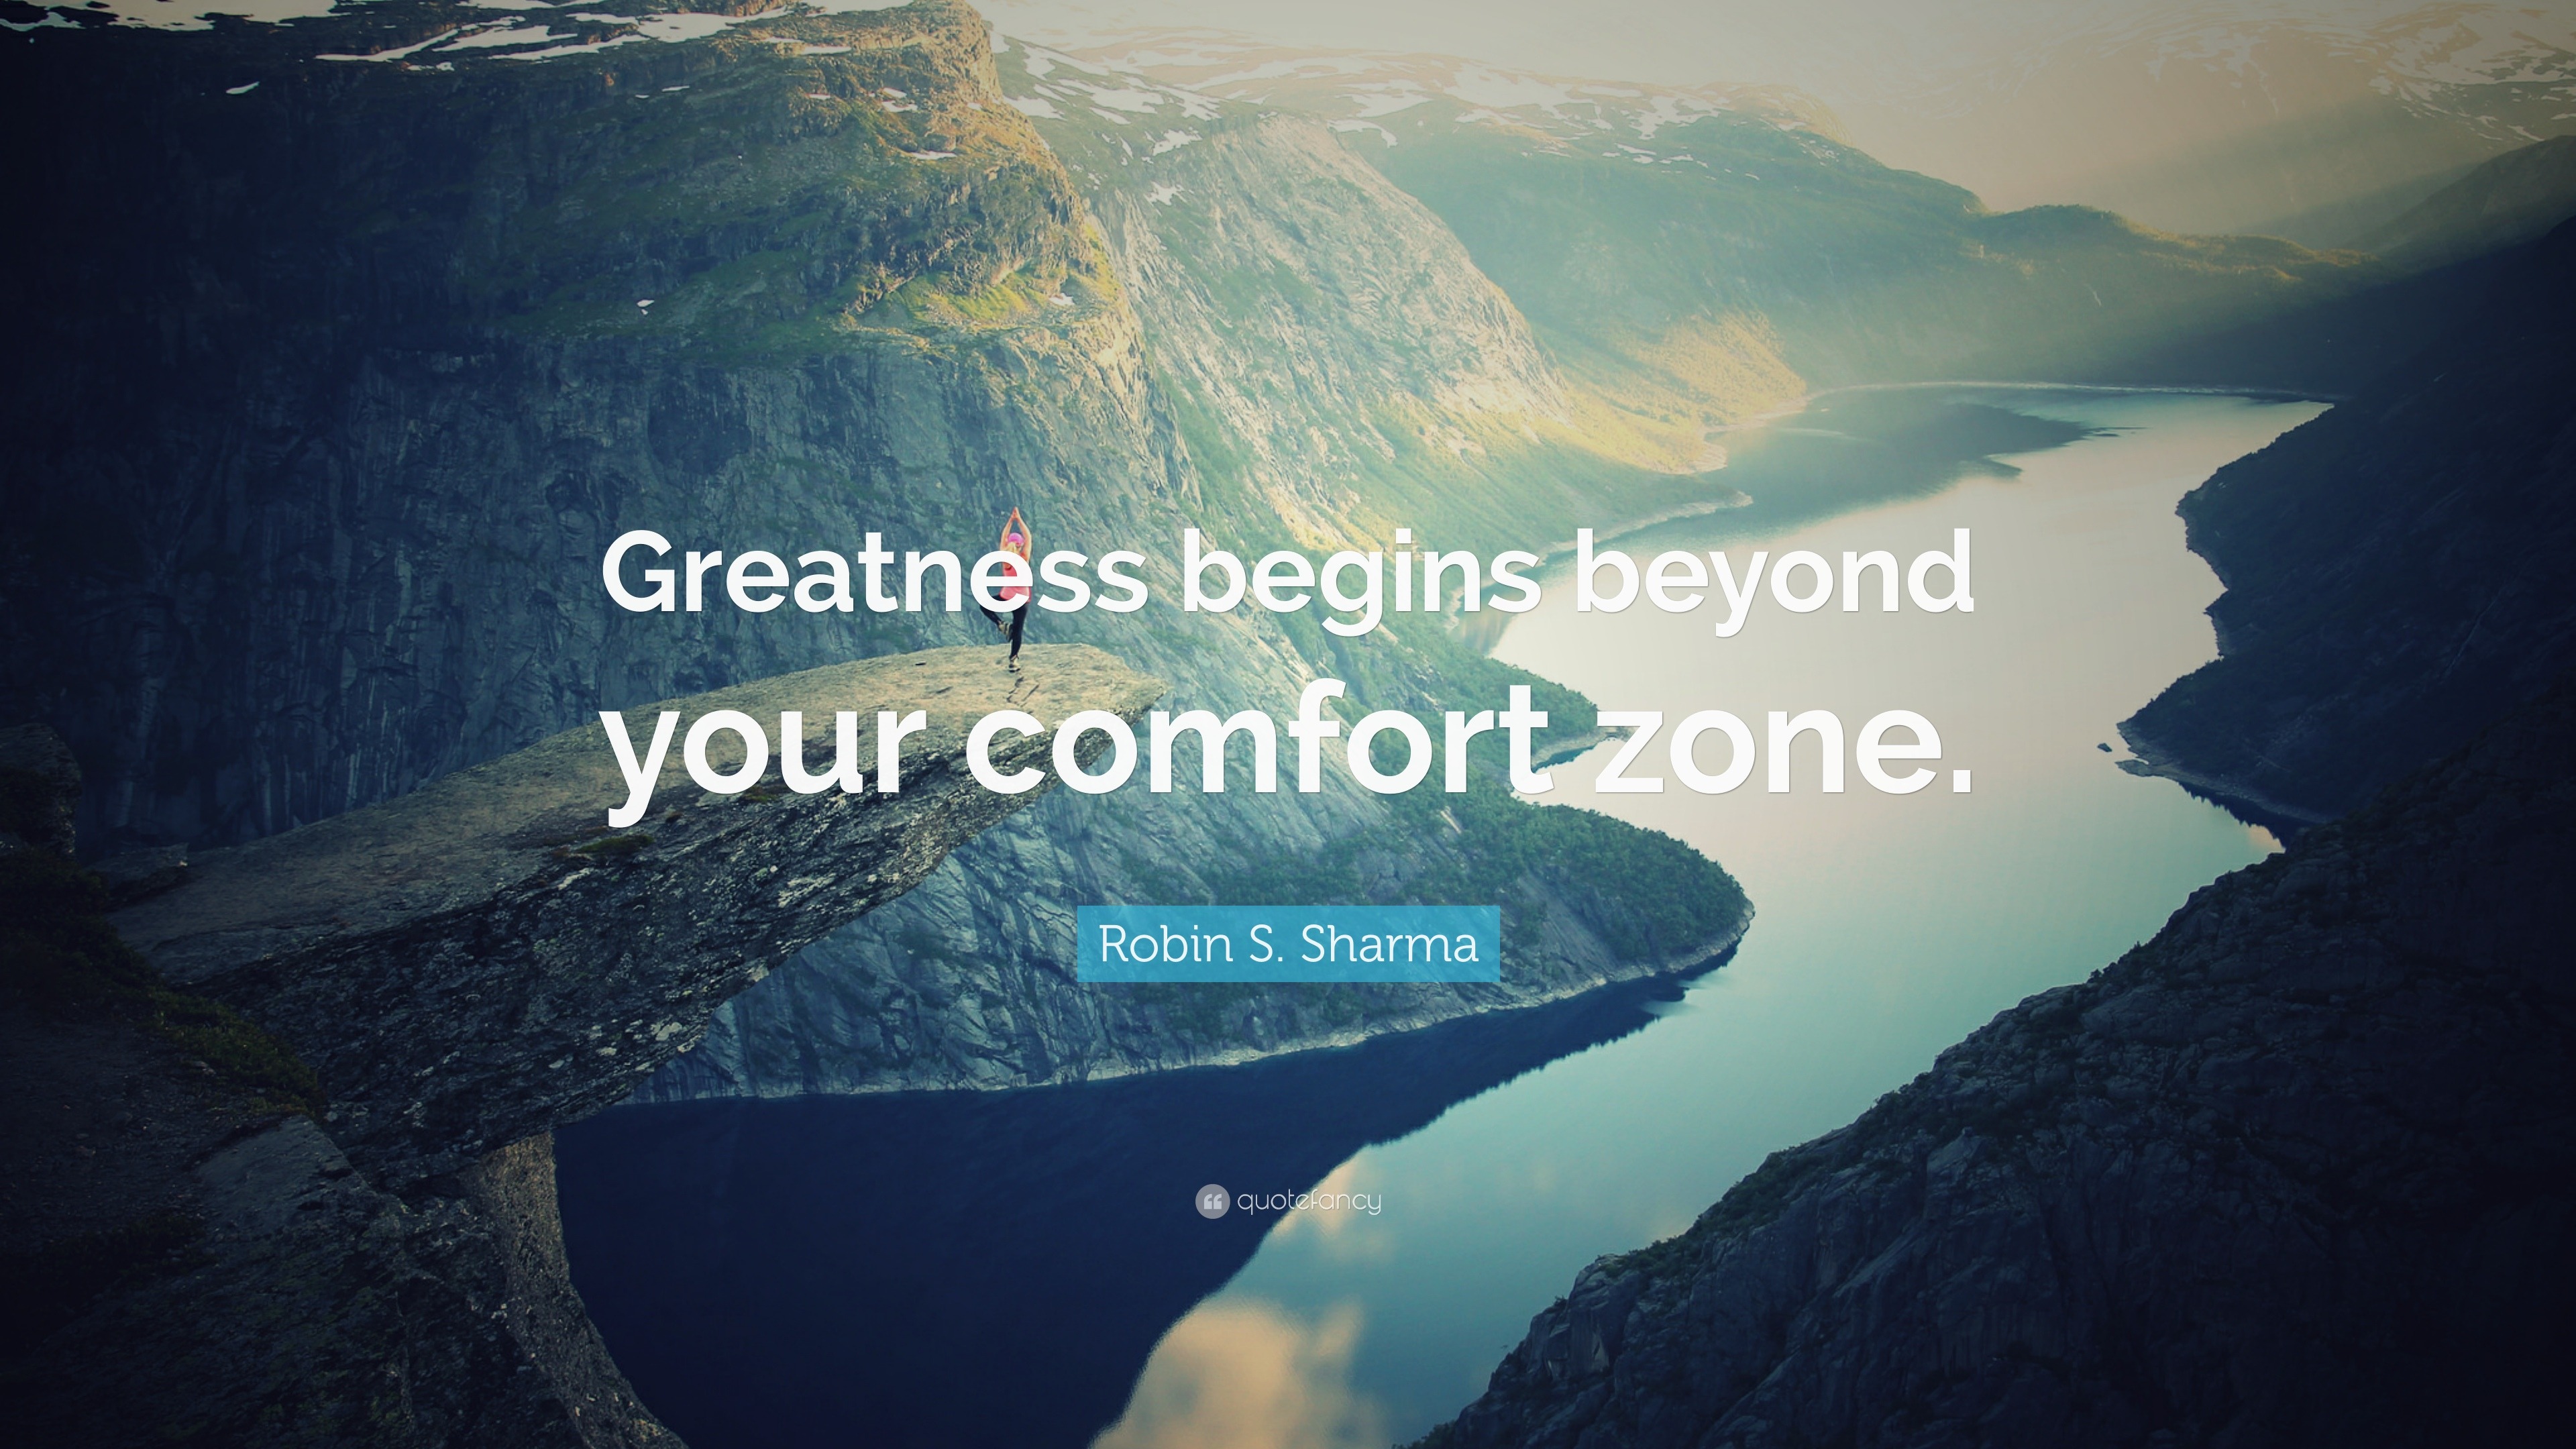 Robin S. Sharma Quote: “Greatness begins beyond your comfort zone.”